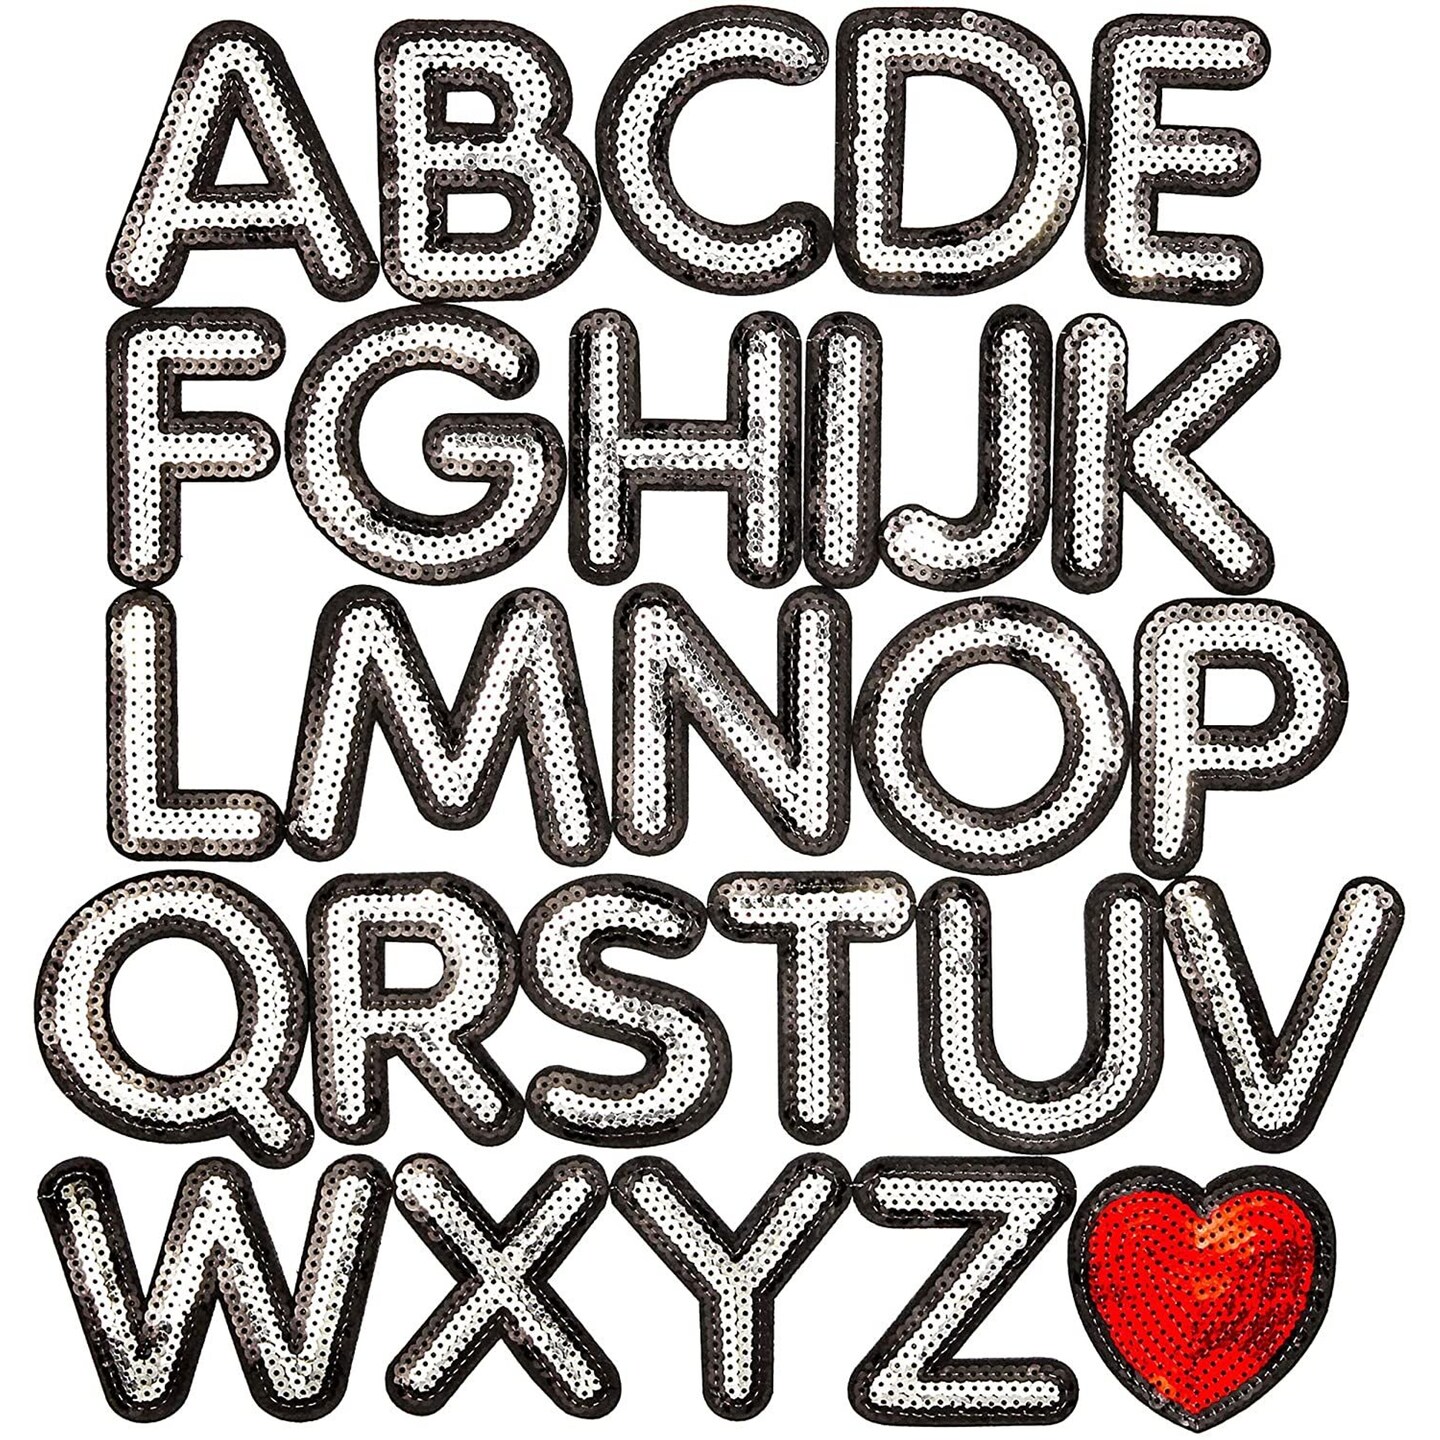 U LETTER Rhinestone Iron on Heat Transfer, Iron on Patches Letters, Iron on  Letters for Fabric, Letter Patches Iron On, Sequence Iron On 